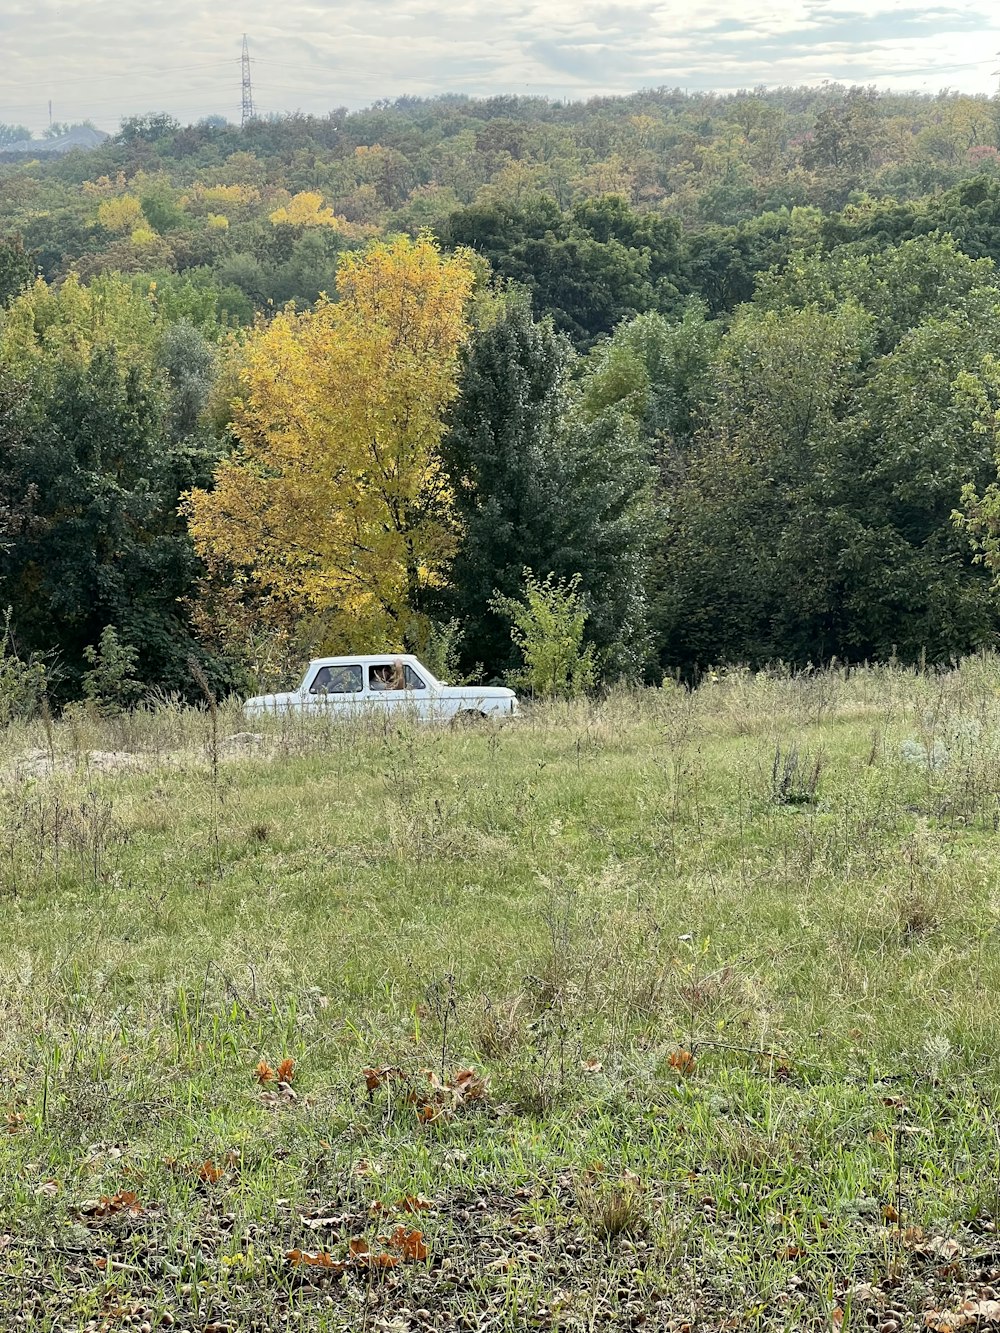 a car is parked in a field with trees in the background